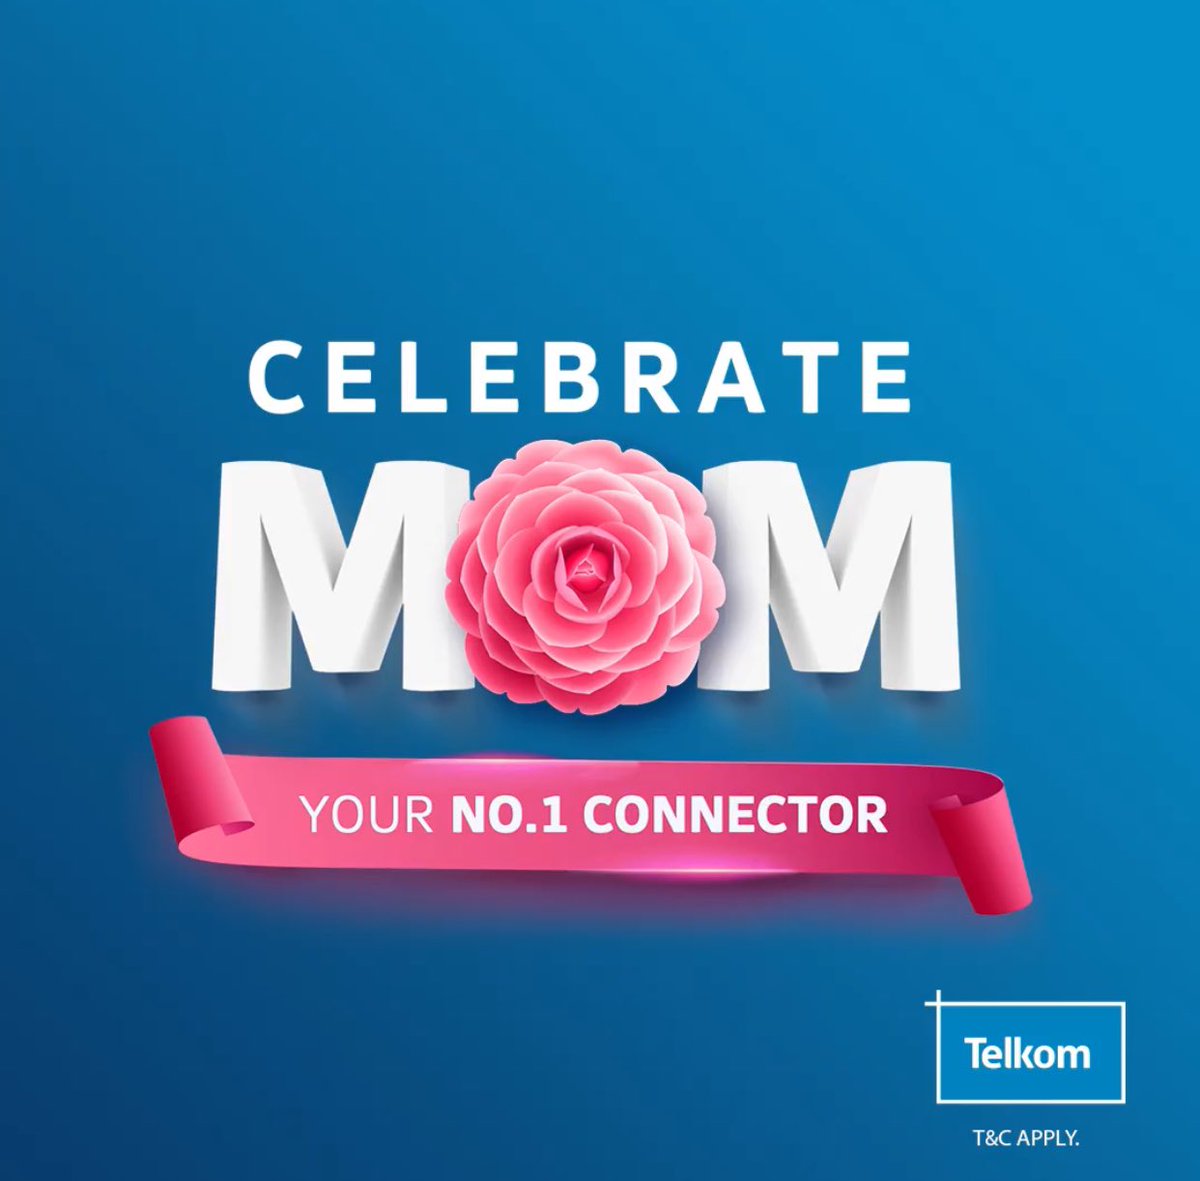 MOTHER'S DAY R500 TAKEALOT VOUCHER GIVEAWAY🎫🛍️

Celebrate the Queen of your heart with everyone 💃🏽

To enter the #TelkomMothersDay giveaway, simply answer this question:

1️⃣What's the most selfless thing your mom has ever done for you?

2️⃣Share your heartwarming story below…